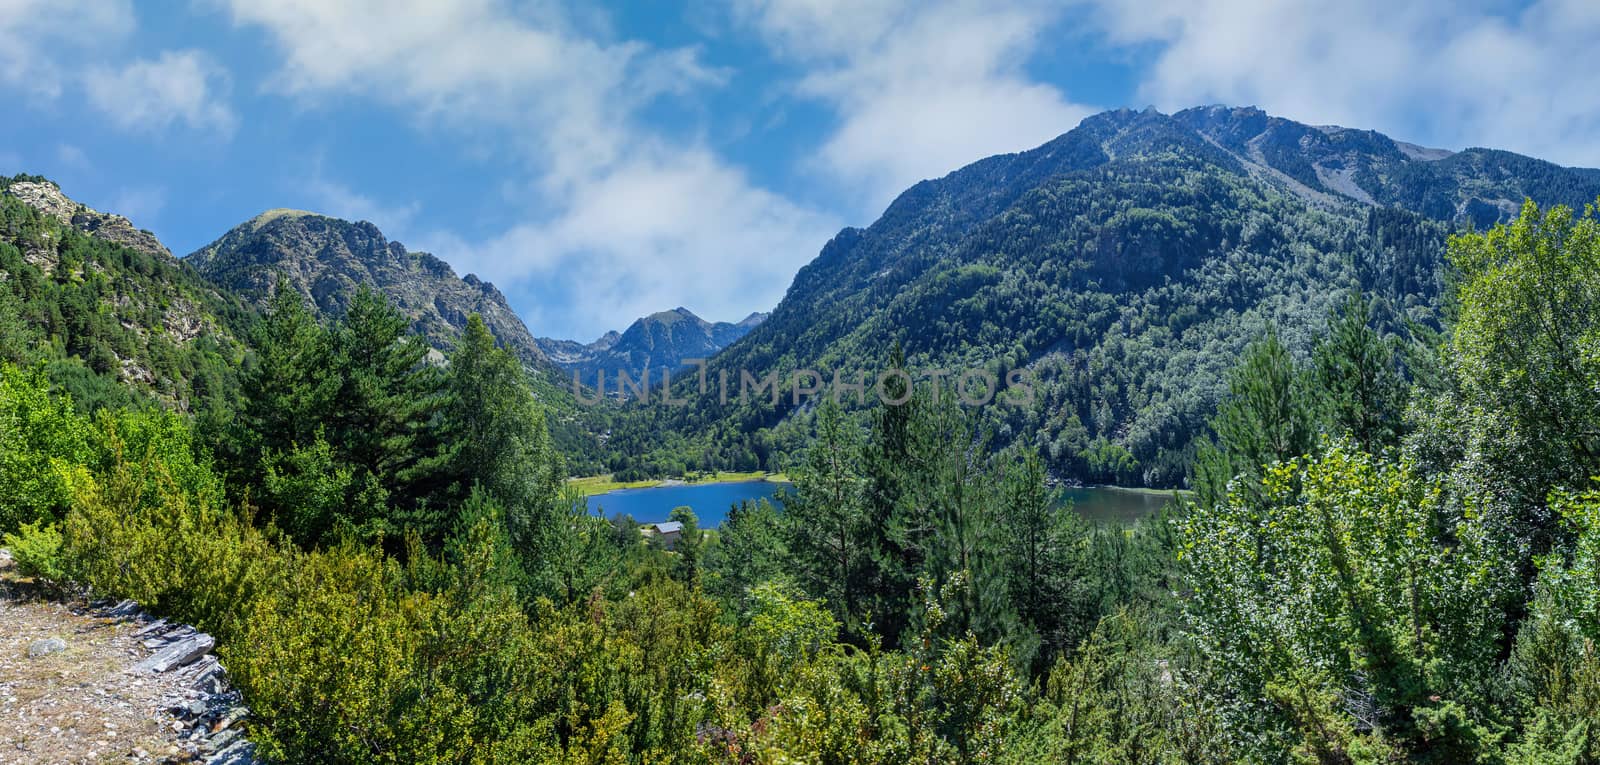 Aigüestortes National Park and Sant Maurici Lake, Catalonia, Spain by Digoarpi